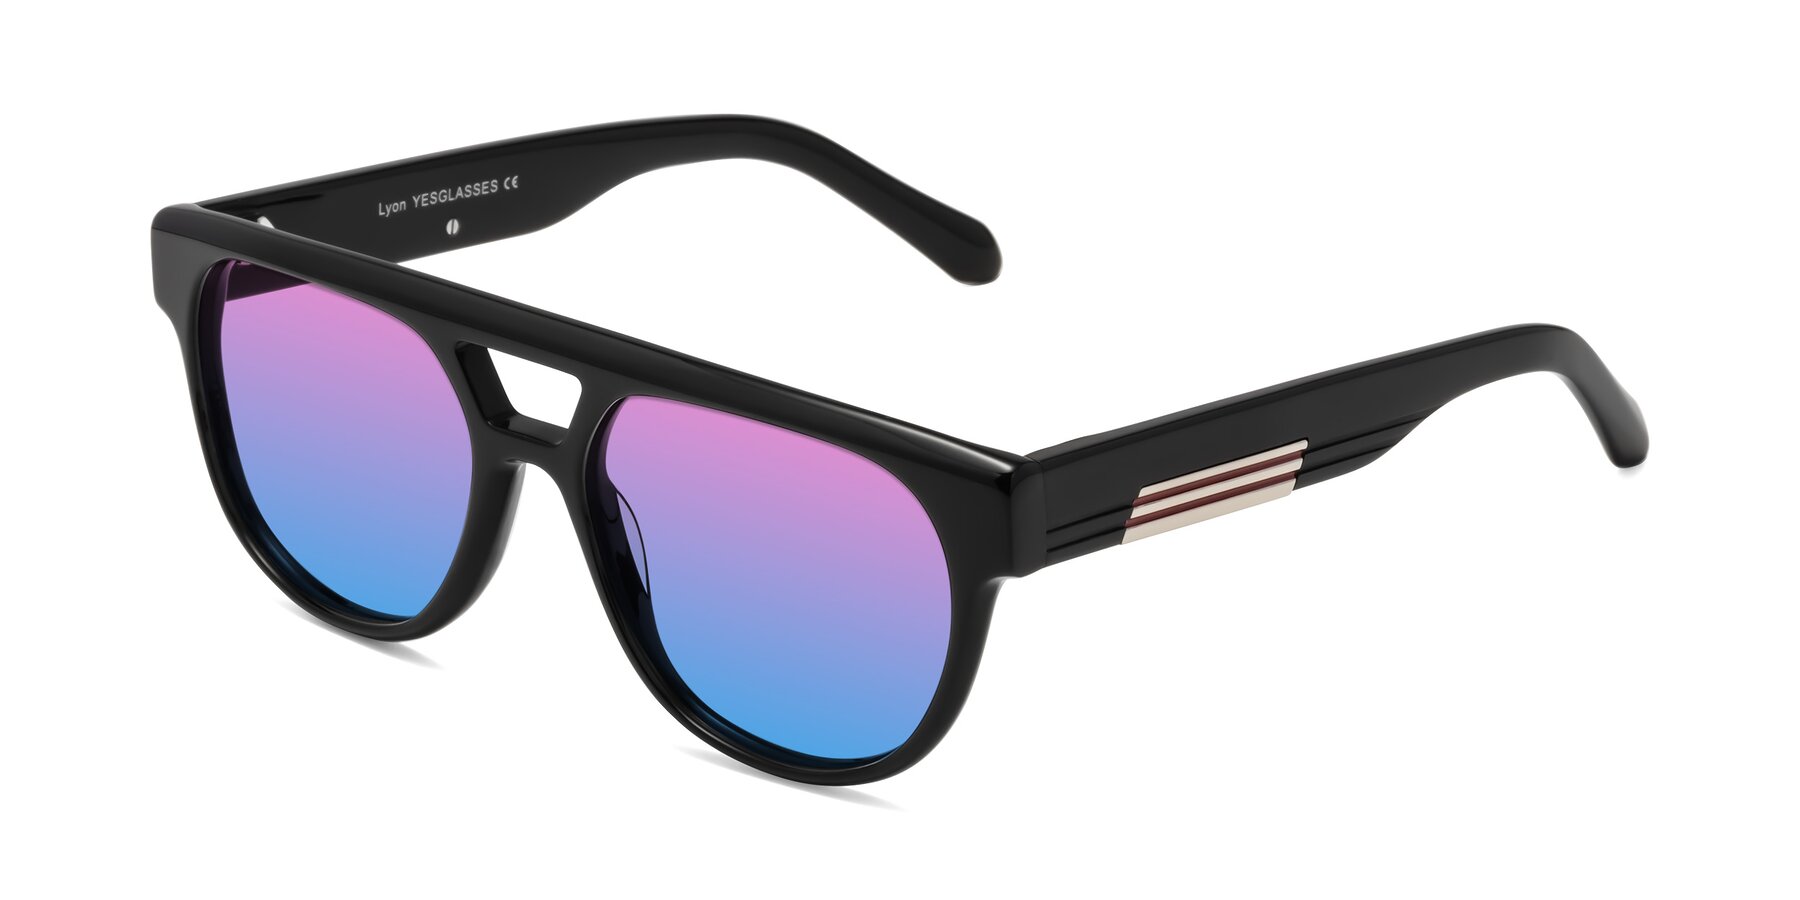 Angle of Lyon in Black with Pink / Blue Gradient Lenses